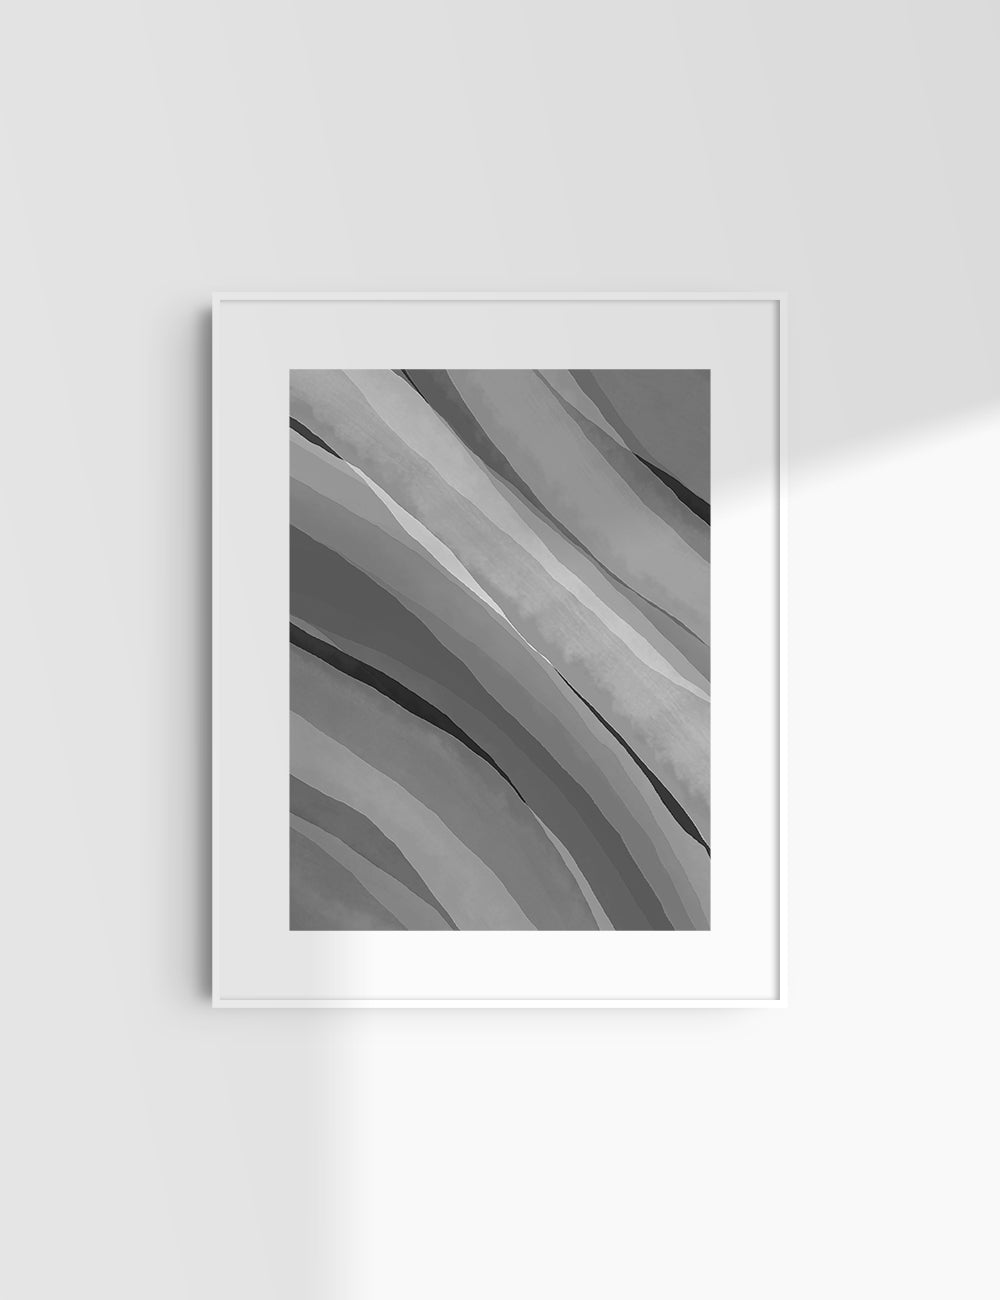 WATERCOLOR ABSTRACT. Shades of Grey. Aesthetic. Minimalist. Abstract Watercolor Painting. Printable Wall Art. - PAPER MOON Art & Design